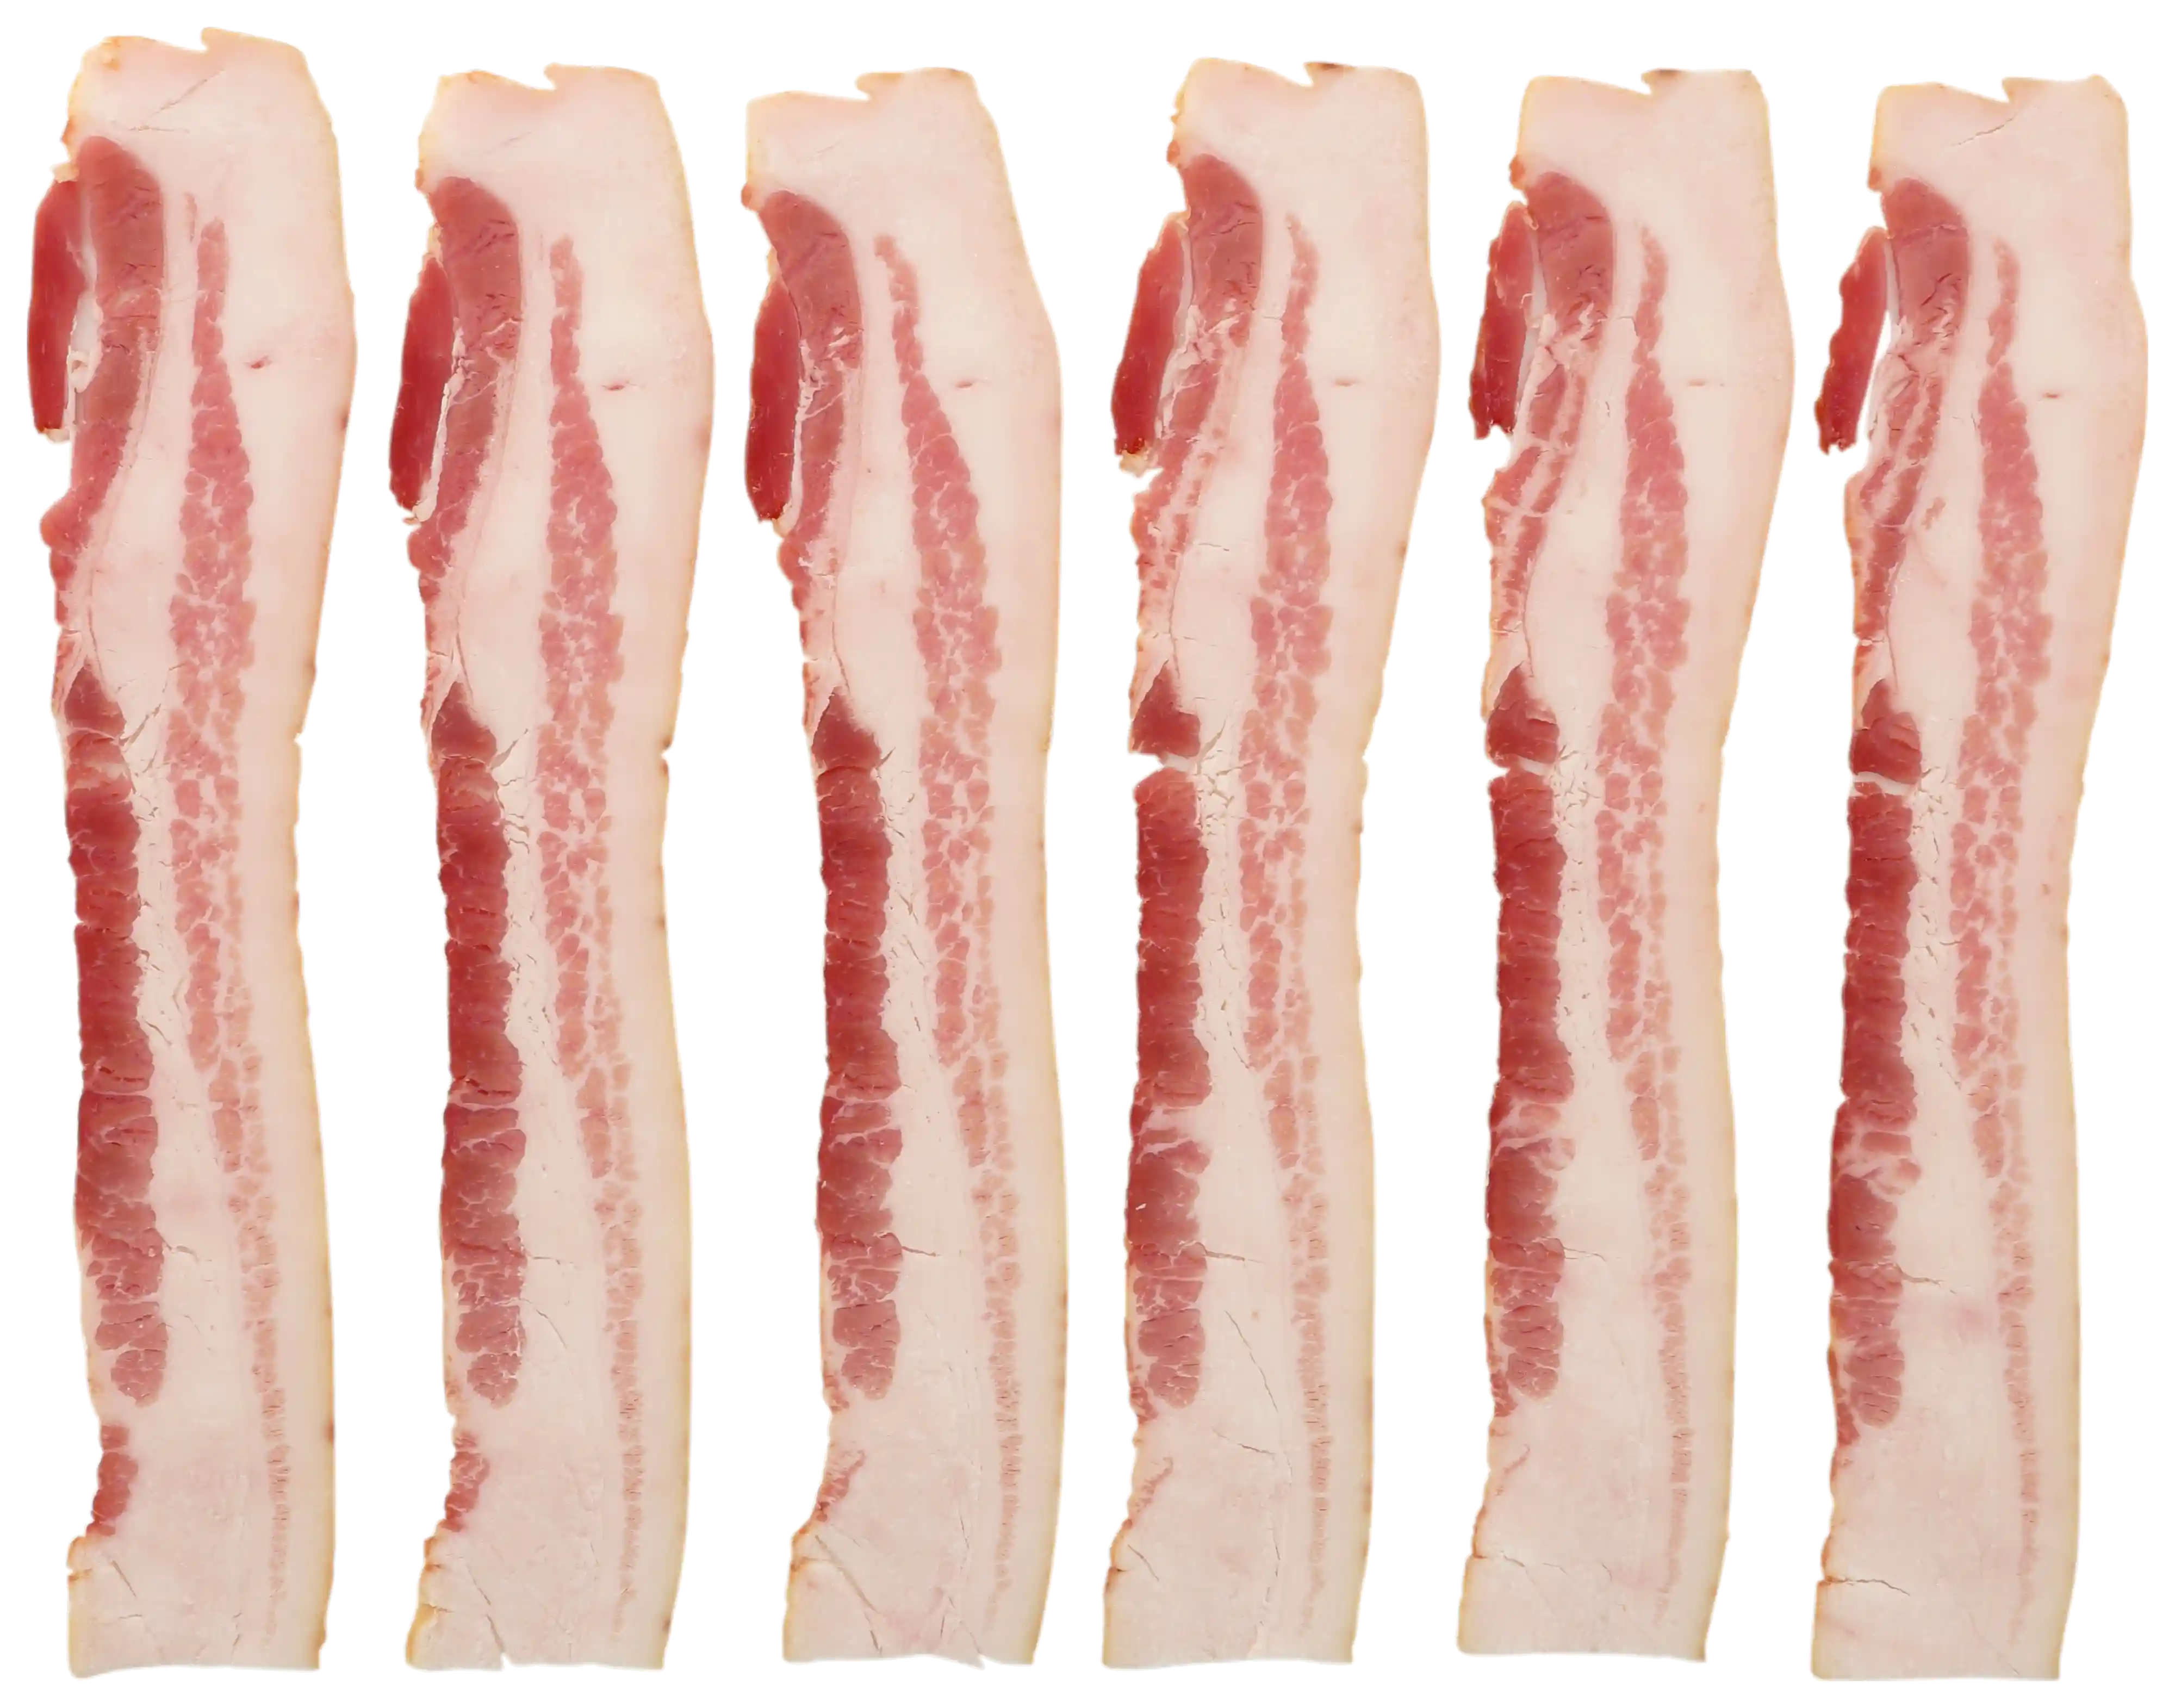 Wright® Brand Naturally Hickory Smoked Thin Sliced Bacon, Bulk, 15 Lbs, 18-22 Slices Per Pound, Gas Flushed_image_11